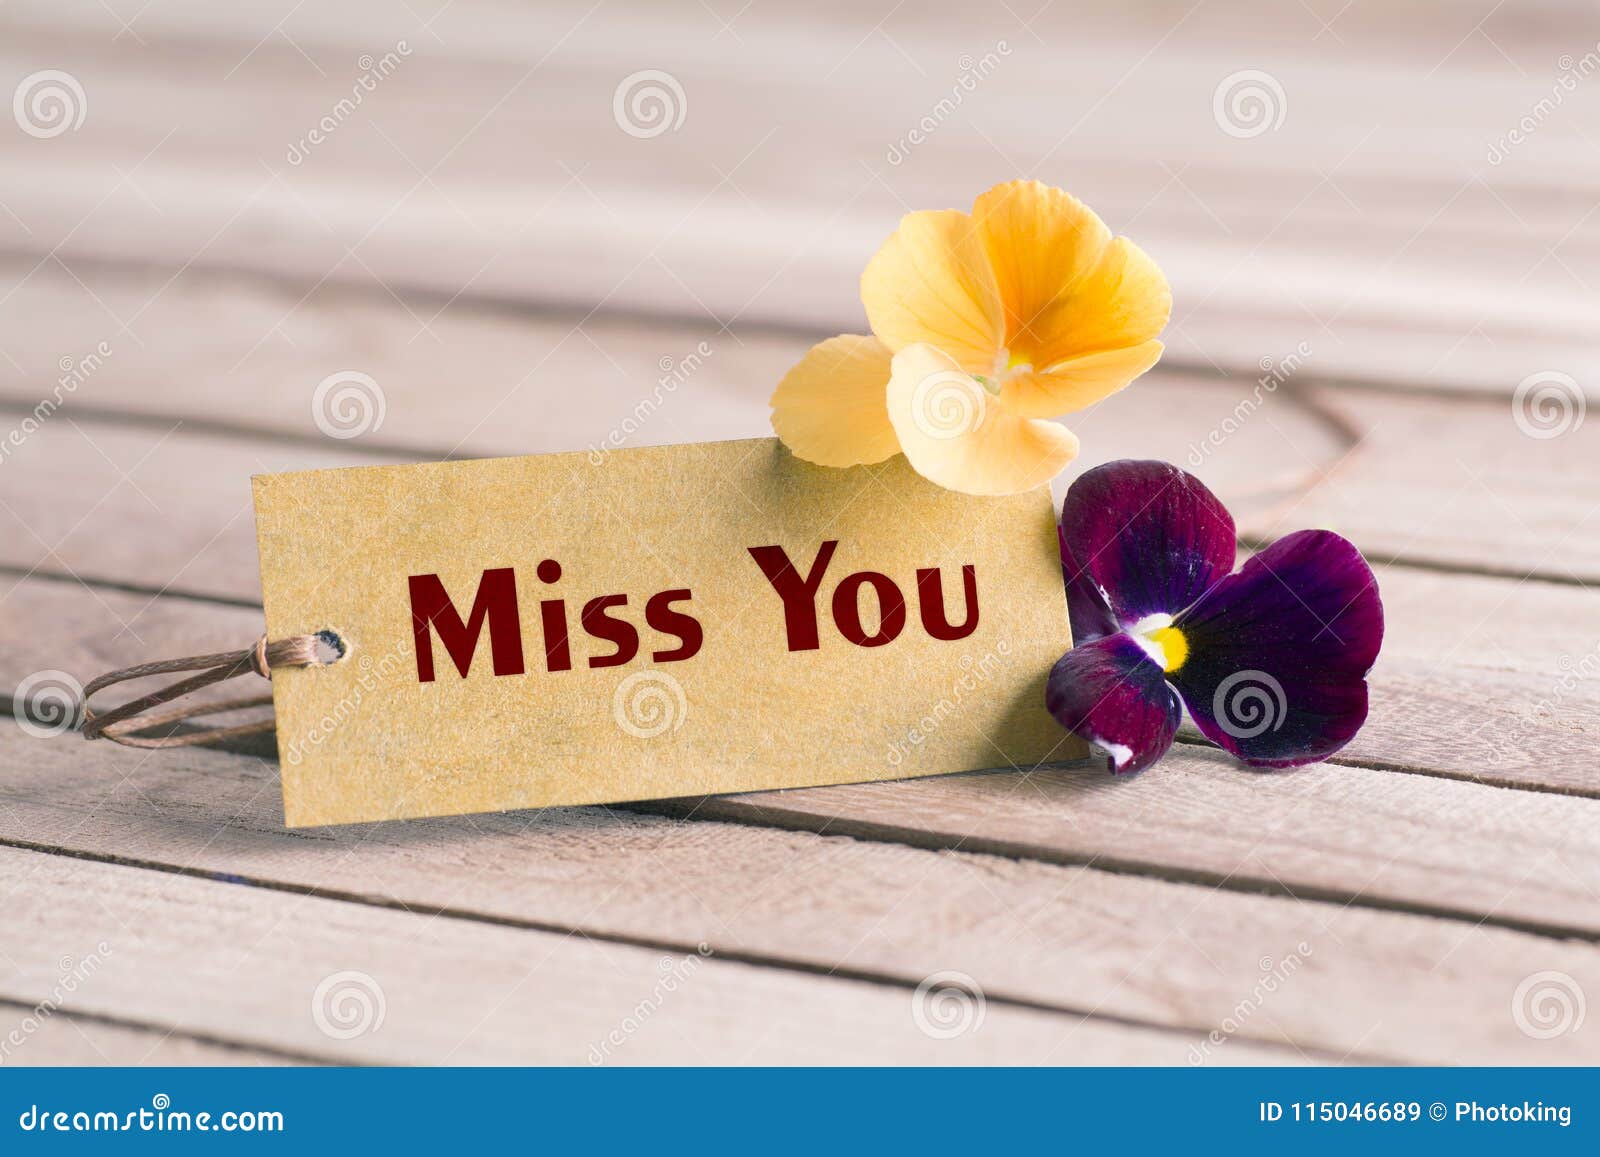 Miss you tag stock image. Image of spring, bouquet, lettering ...